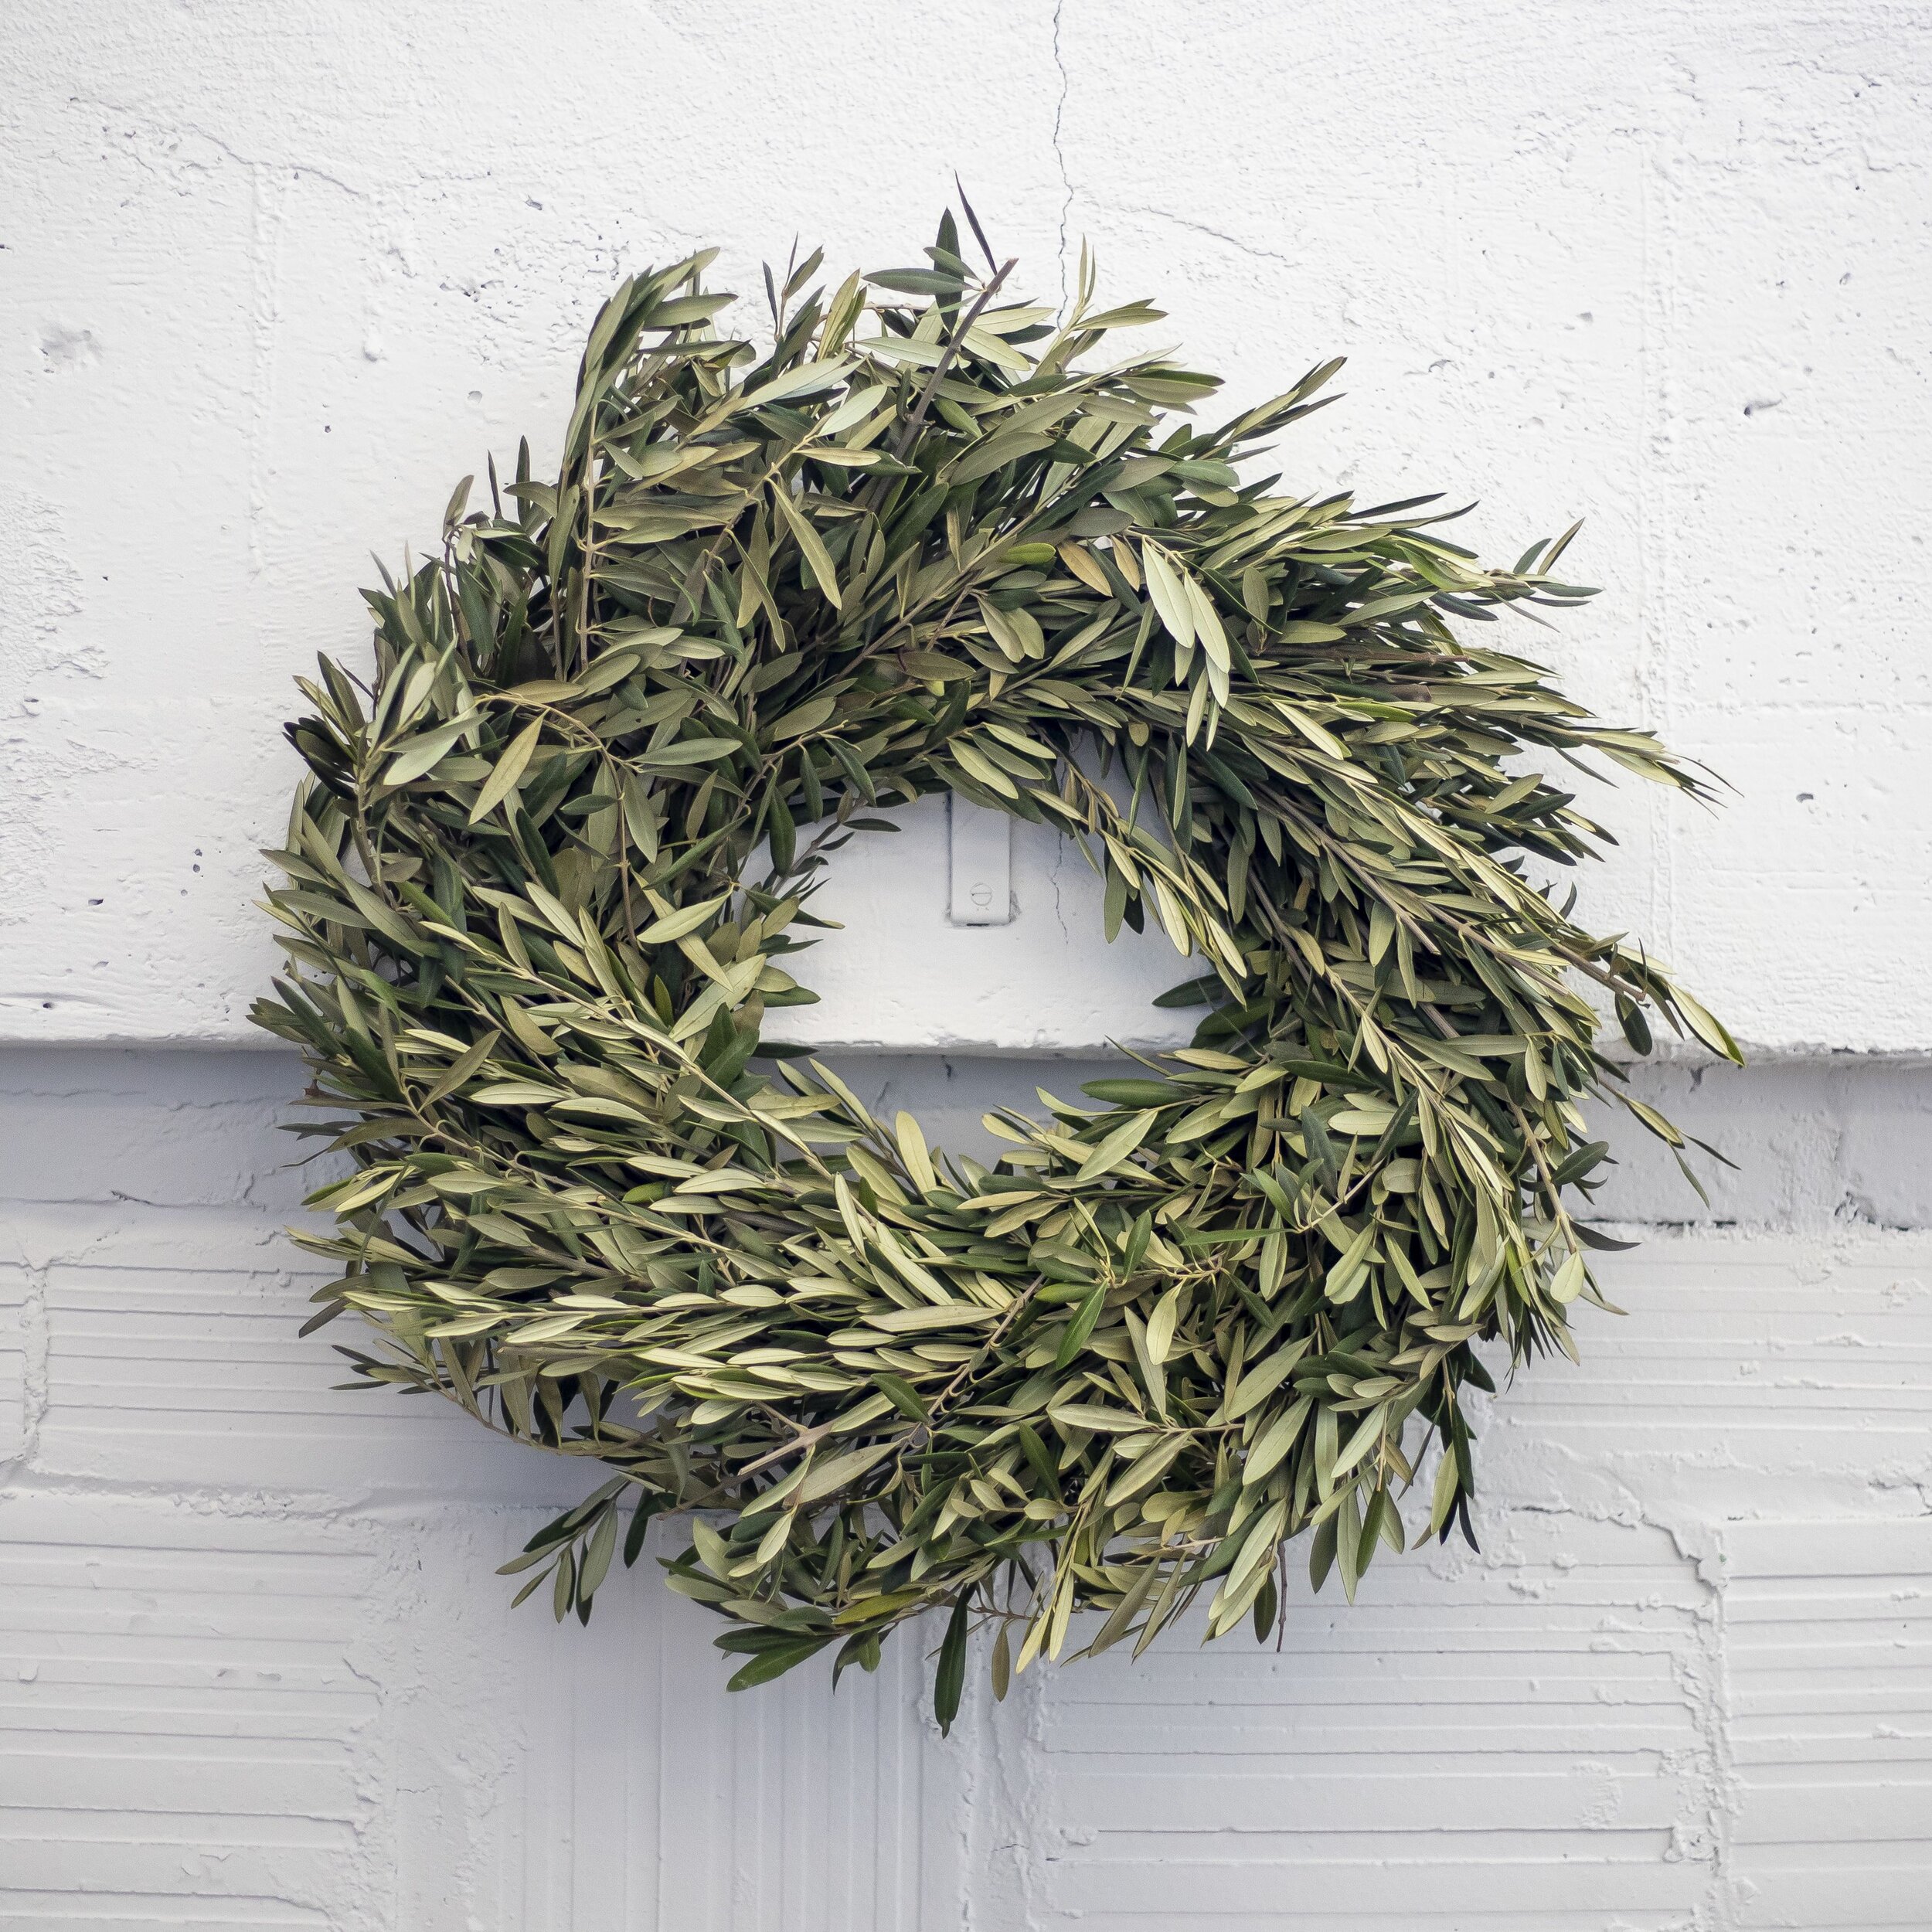 A dried green wreath hanging on a white concrete wall